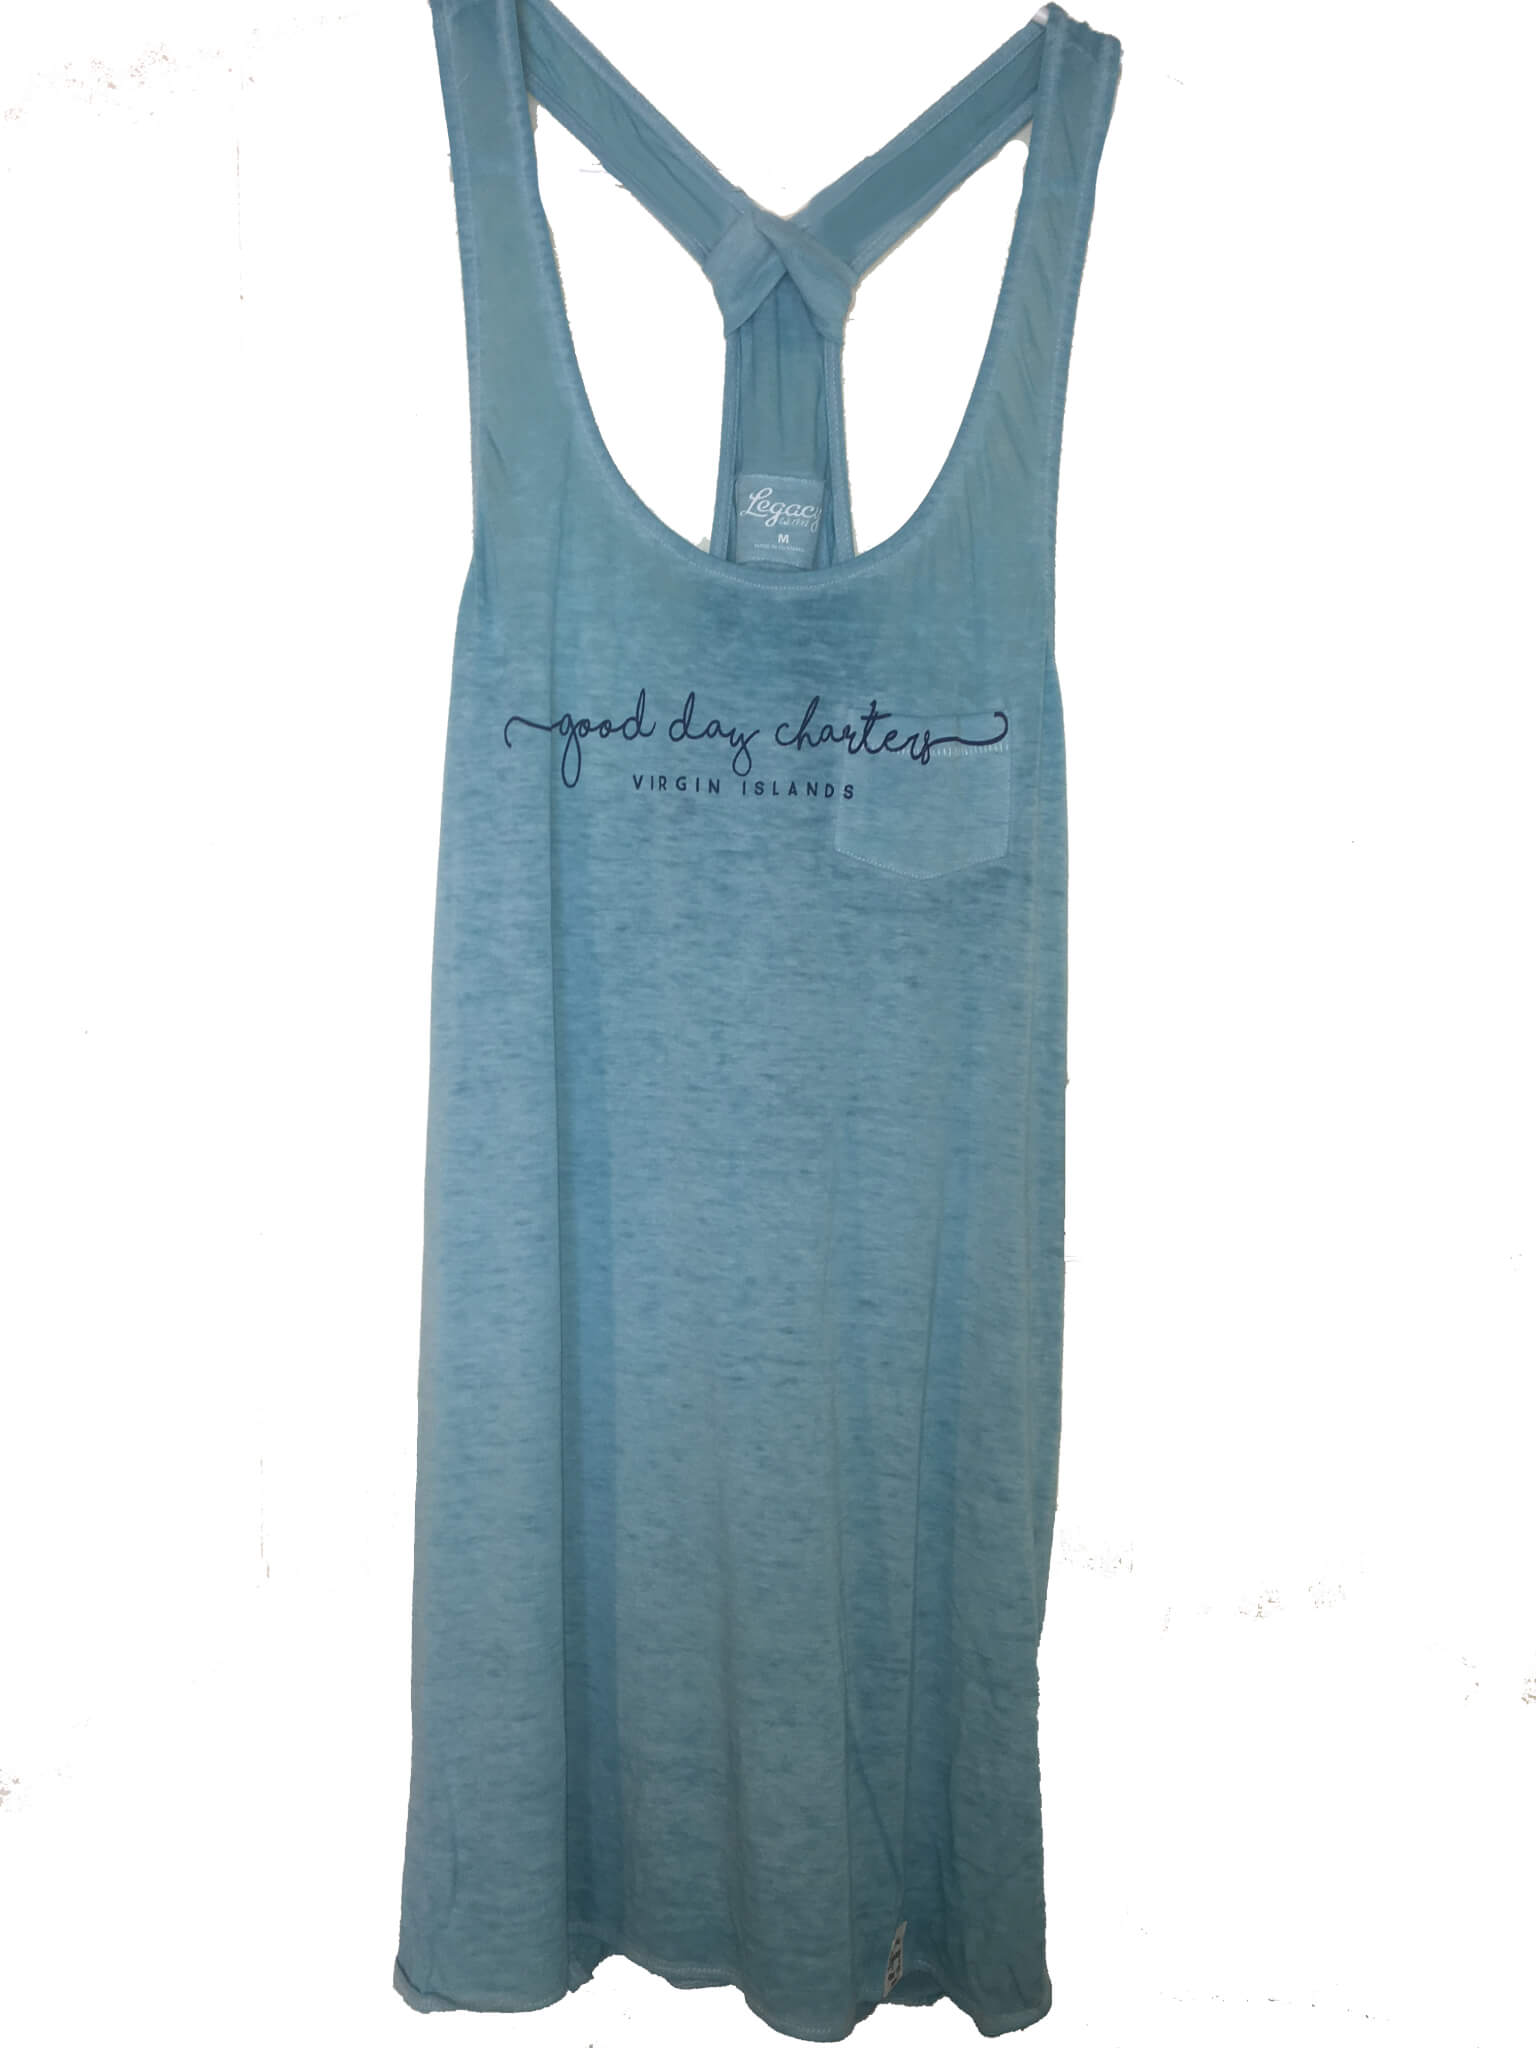 Women's Tank Tops | Vintage-Inspired | Good Day Charters